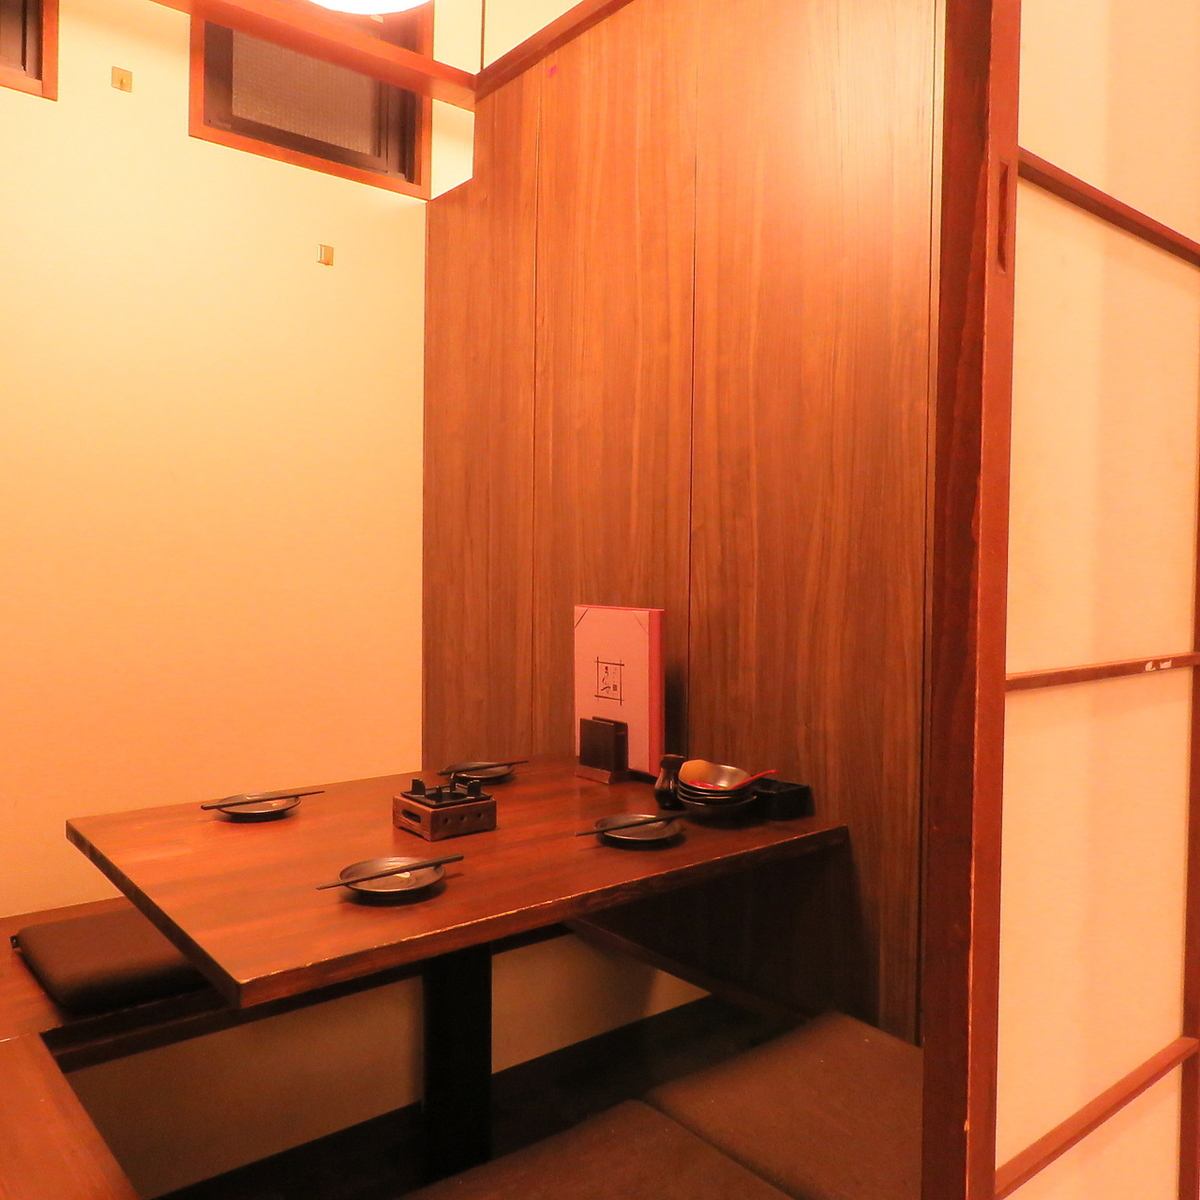 Japanese modern and calm private room for 2 people for a date ... Relaxing Kyoto cuisine ★